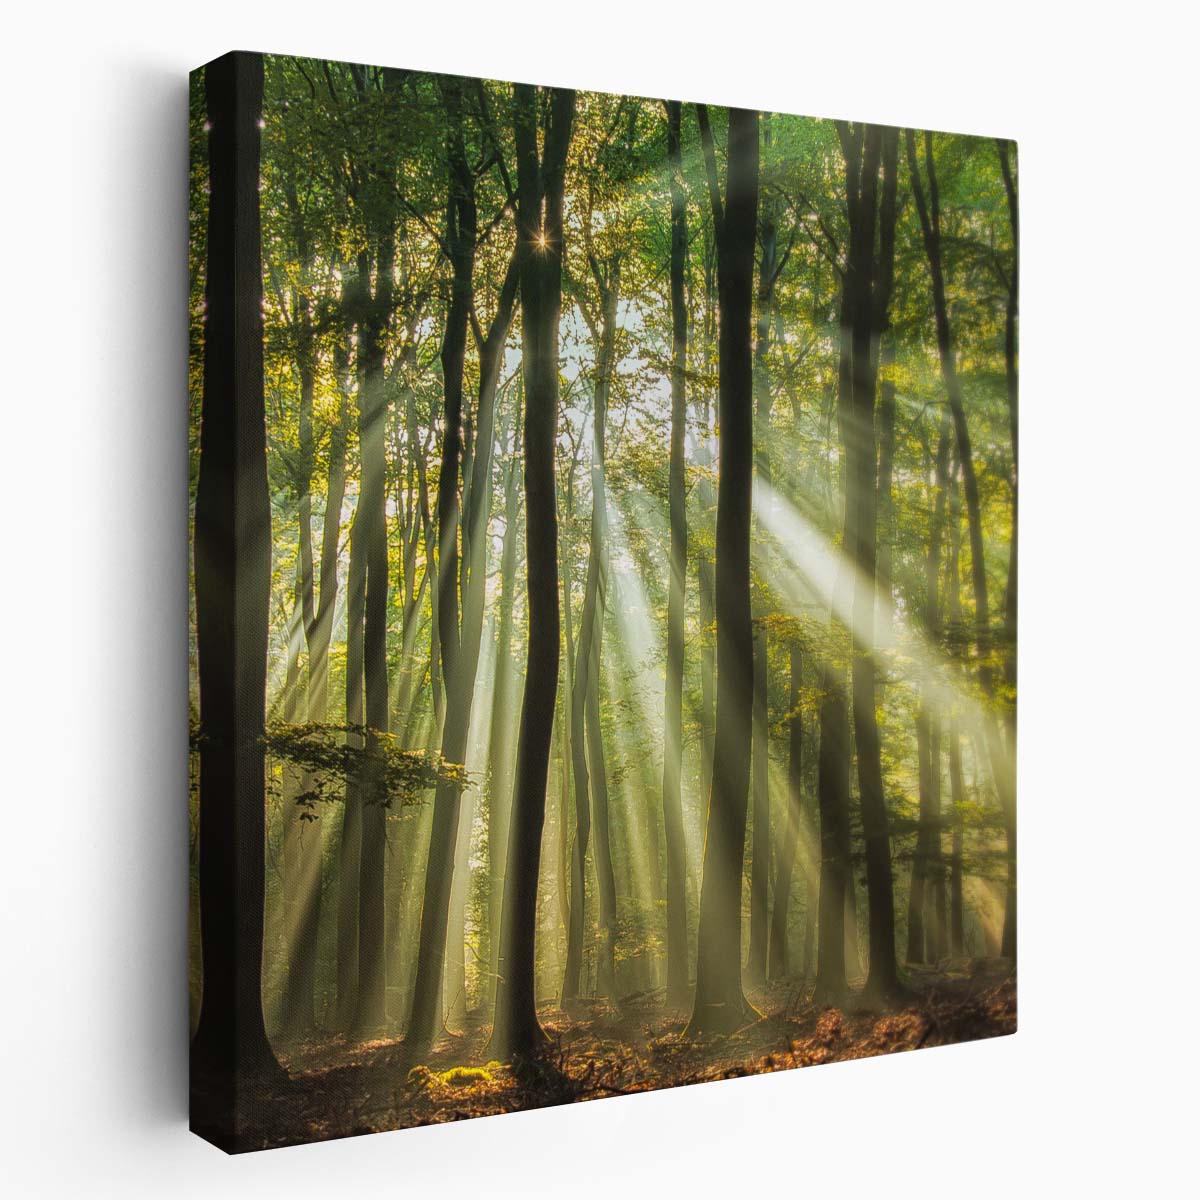 Enchanted Forest Dawn Summer Landscape Photography Wall Art by Luxuriance Designs. Made in USA.